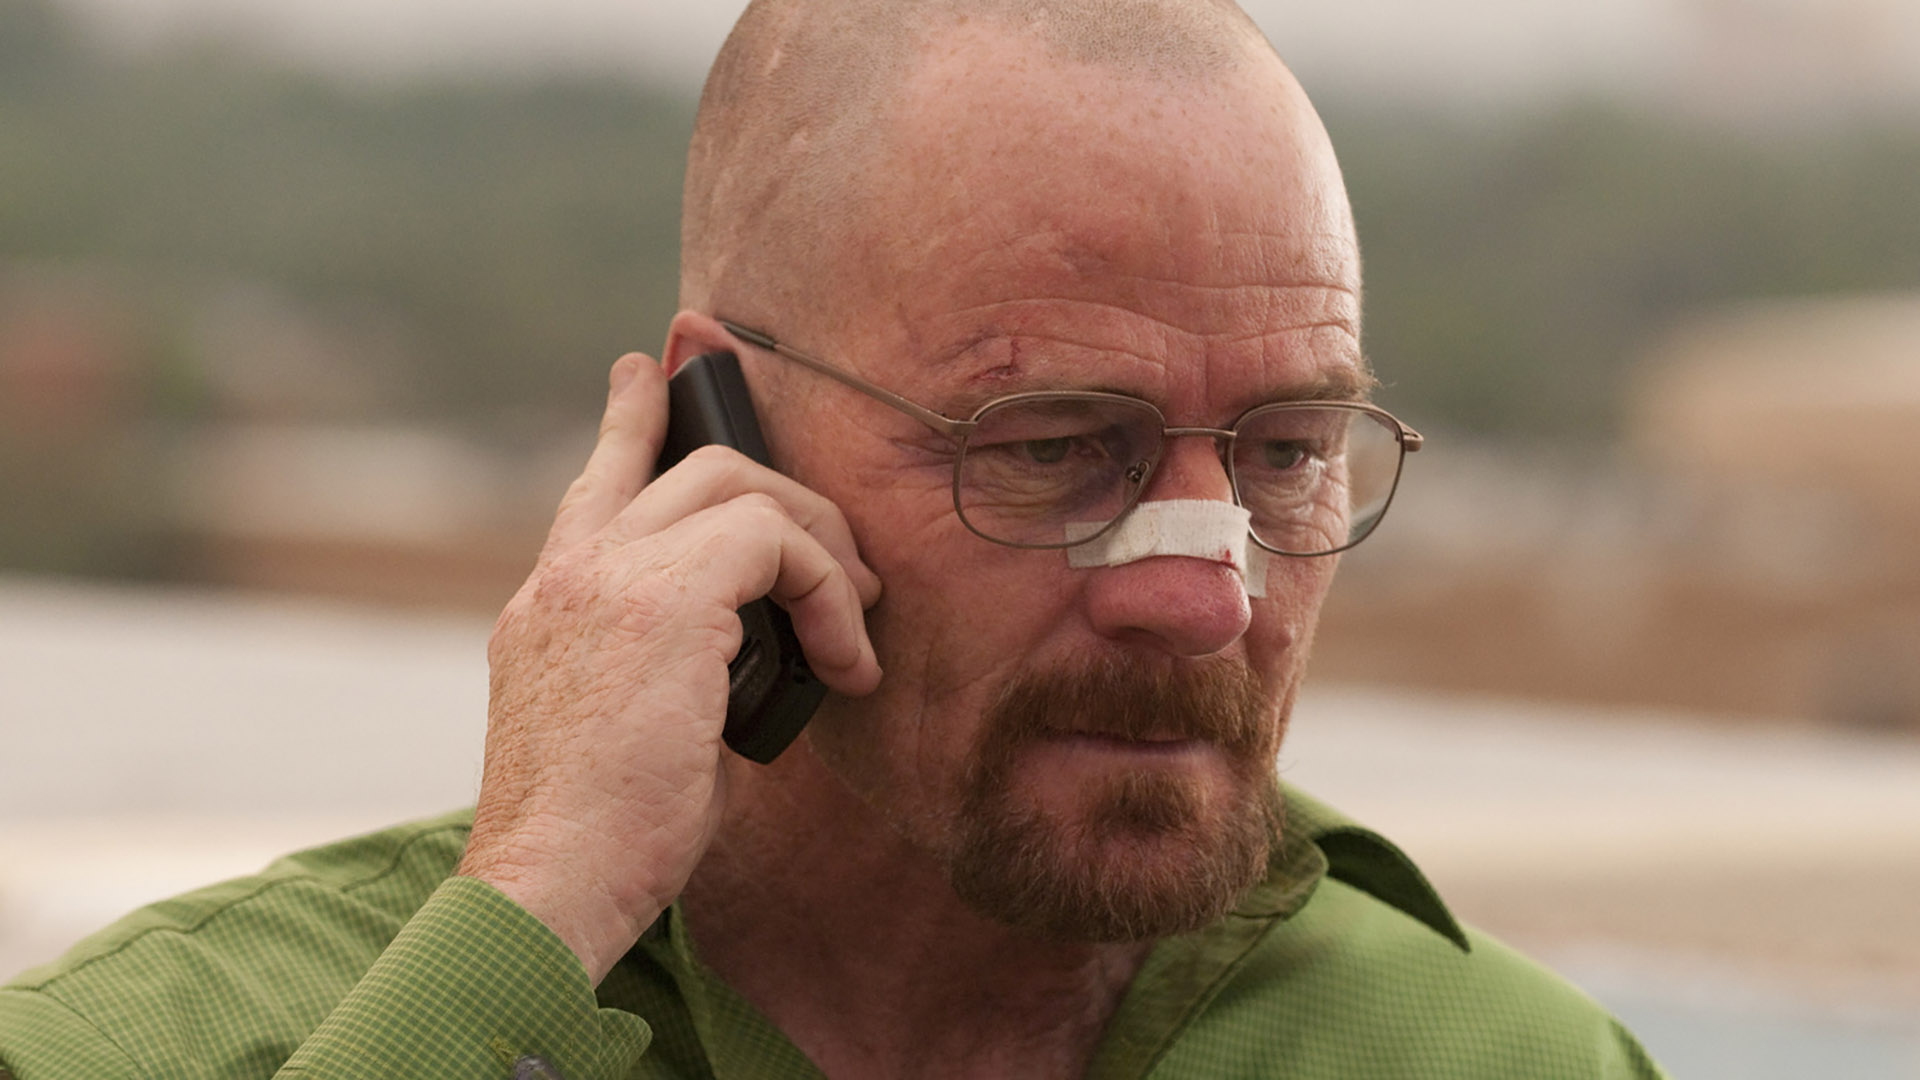 15 Shows With Morally Questionable Main Characters Like Breaking Bad